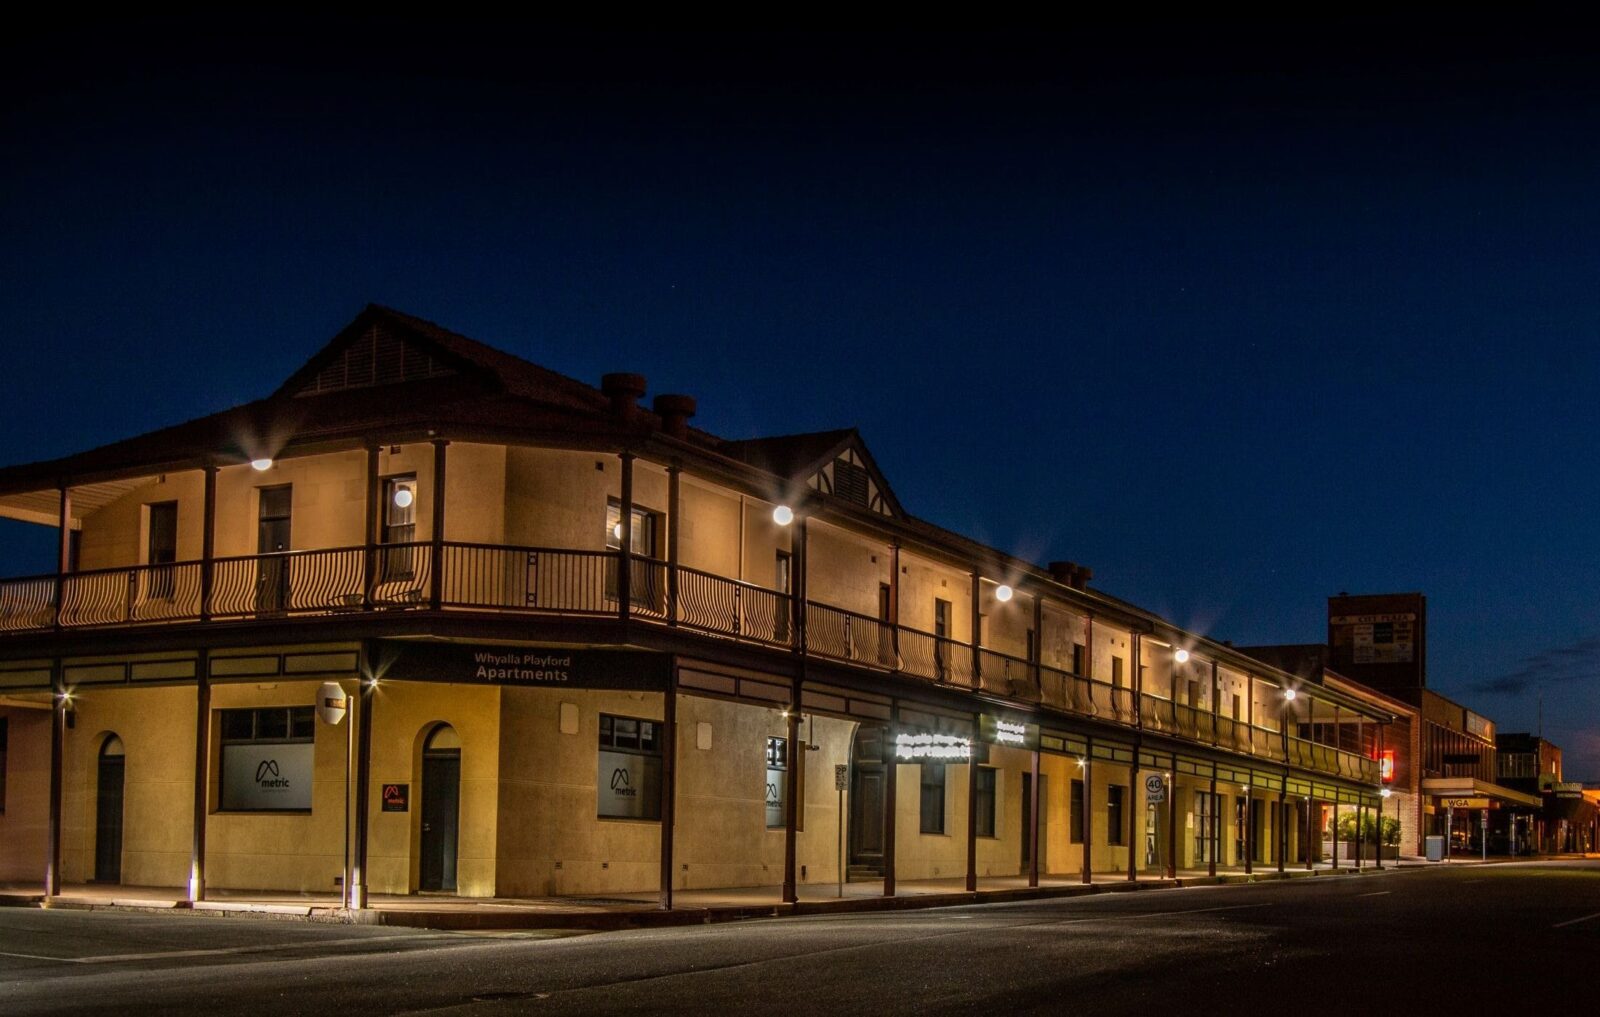 Whyalla Playford Apartments